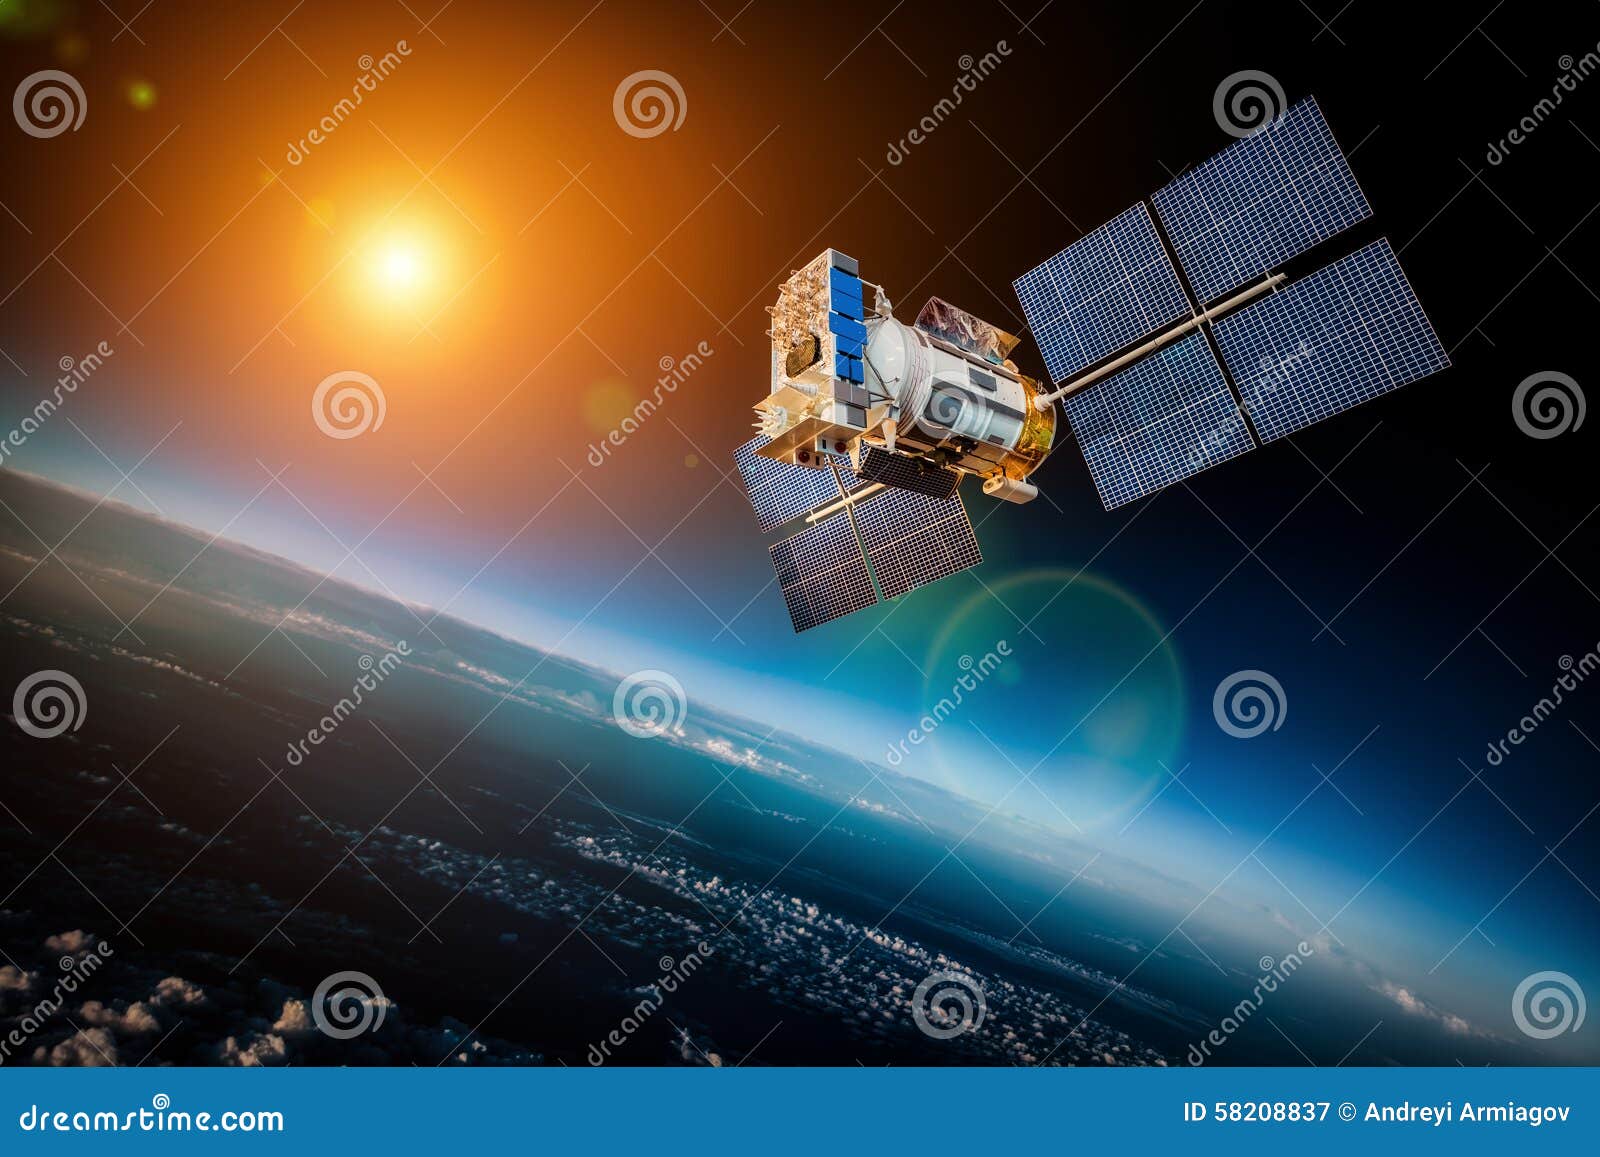 space satellite over the planet earth